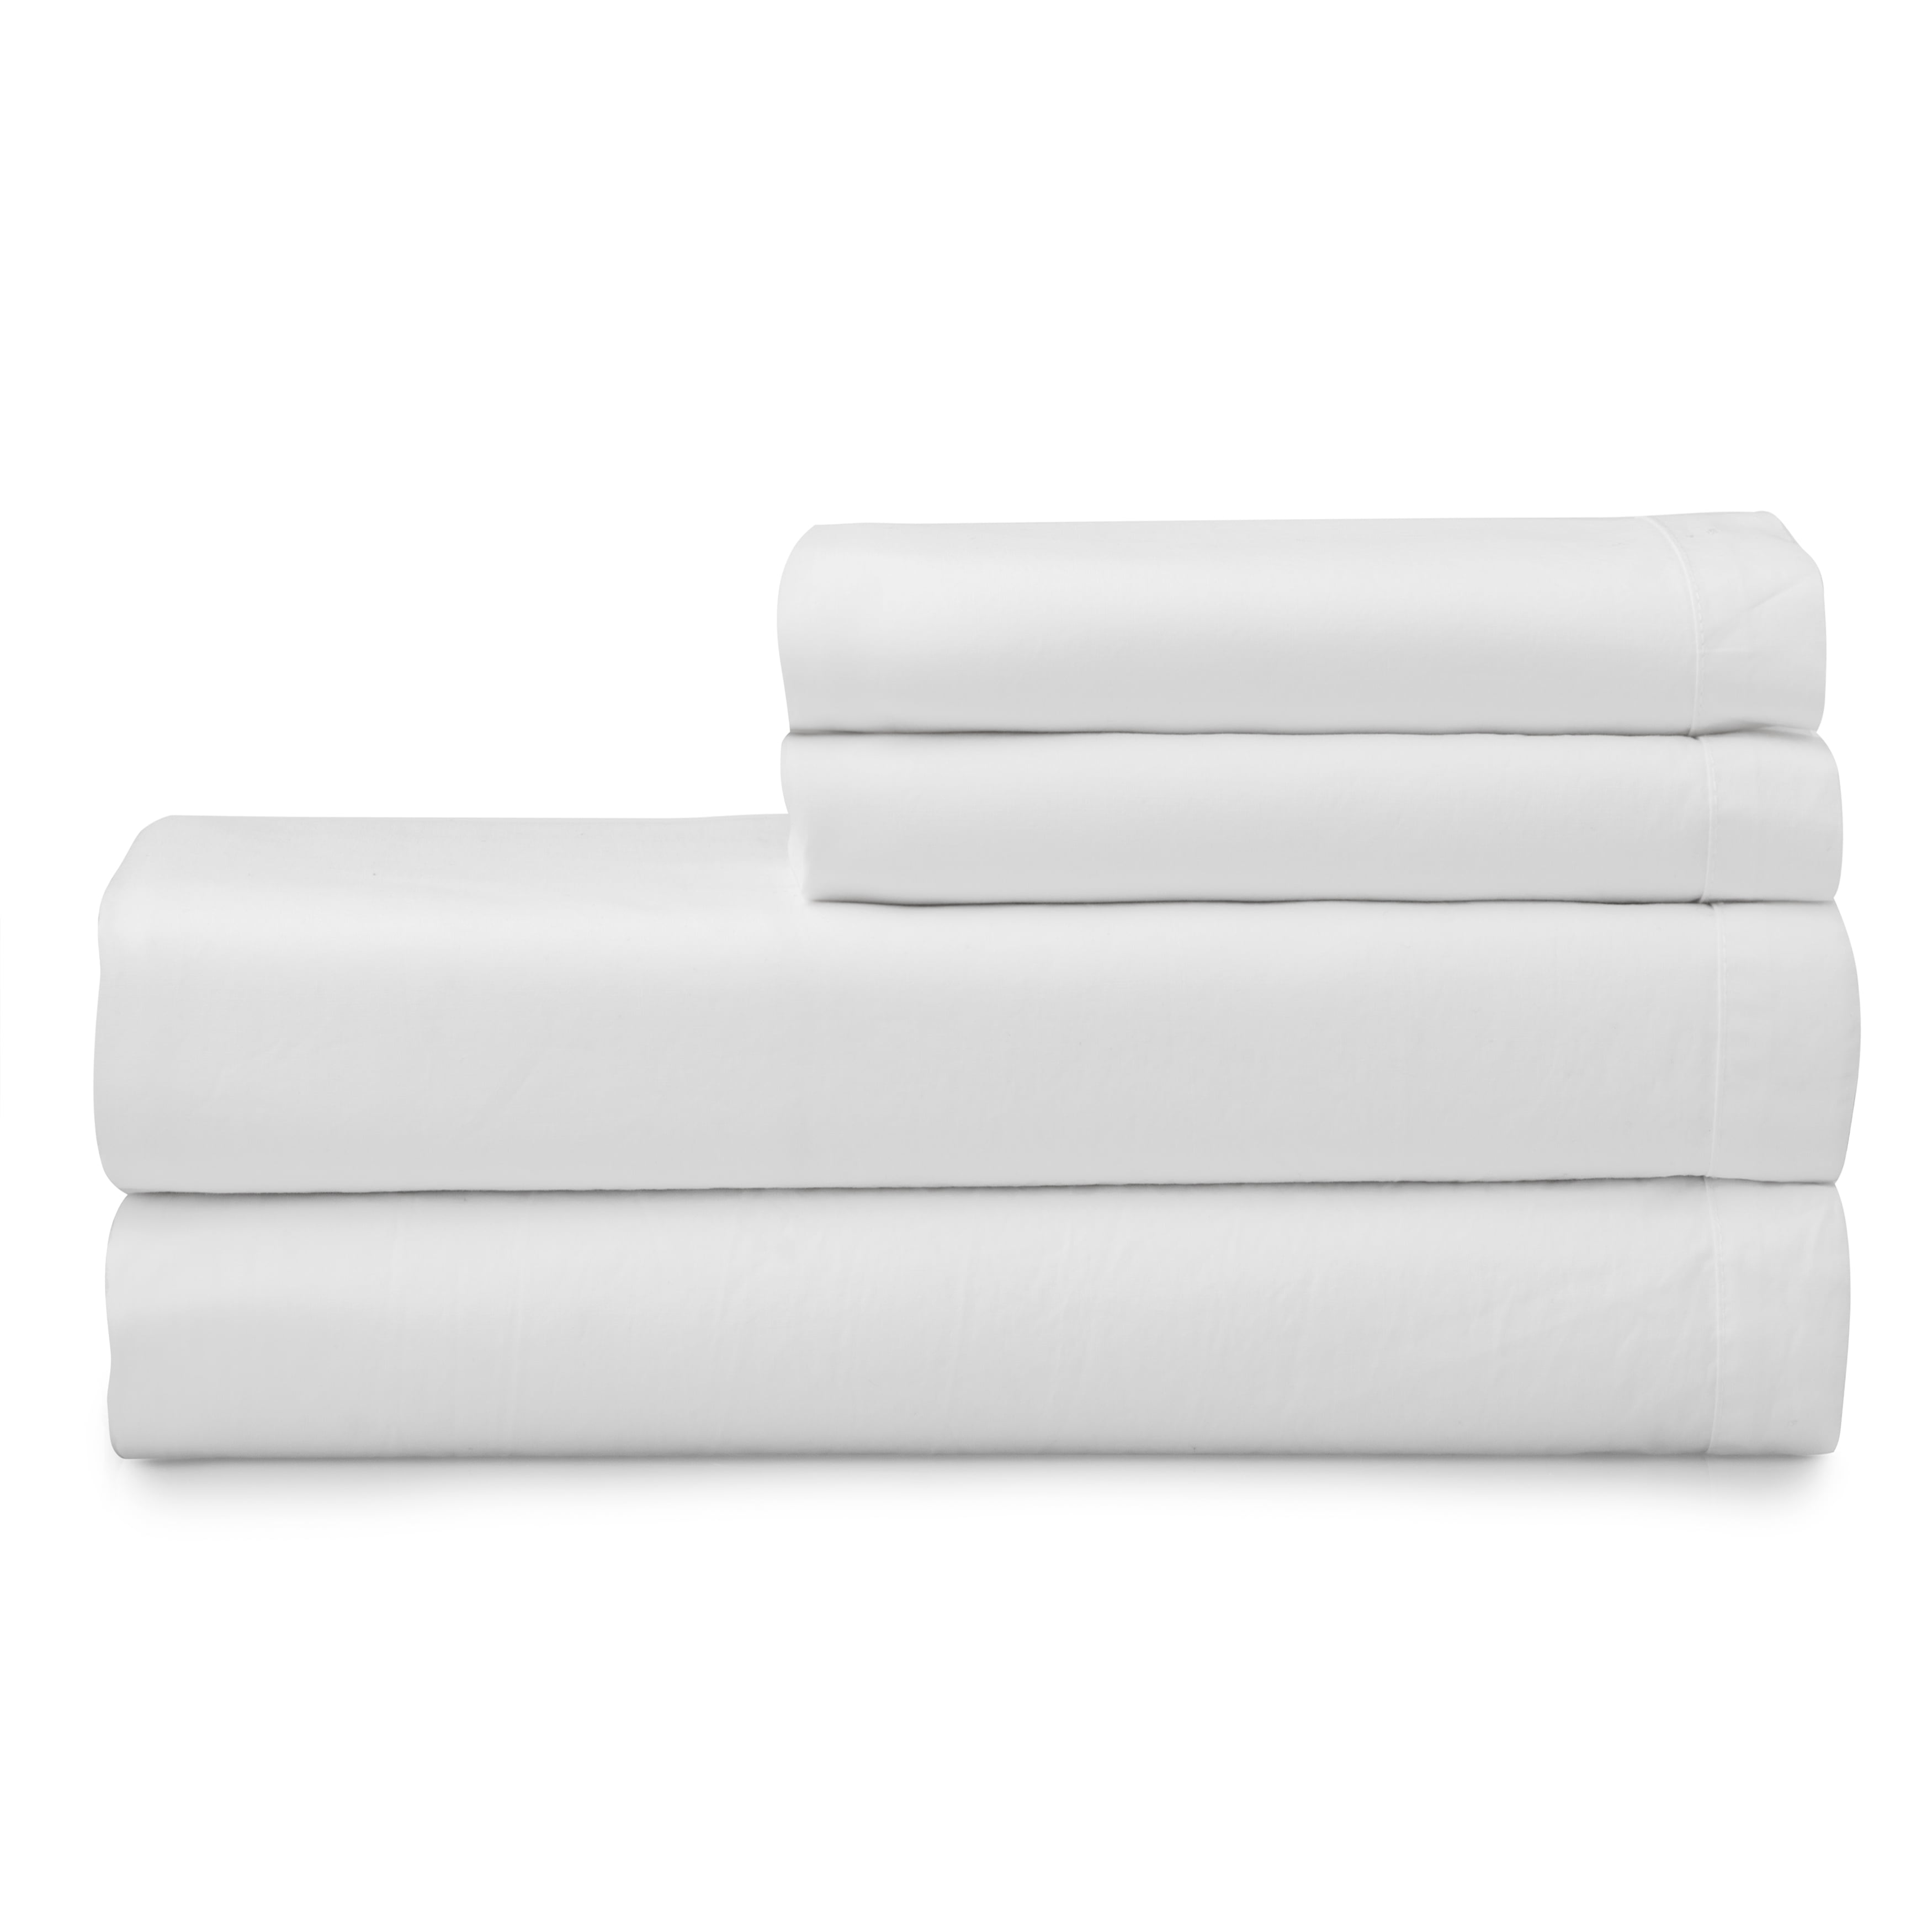 Welhome Luxurious 100% Egyptian Cotton Quilt Silky Soft Breathable Bedspread 300 Thread Count Long Staple Cotton Fiber King/Cal King Size White Machine Washable Durable 108 x 100